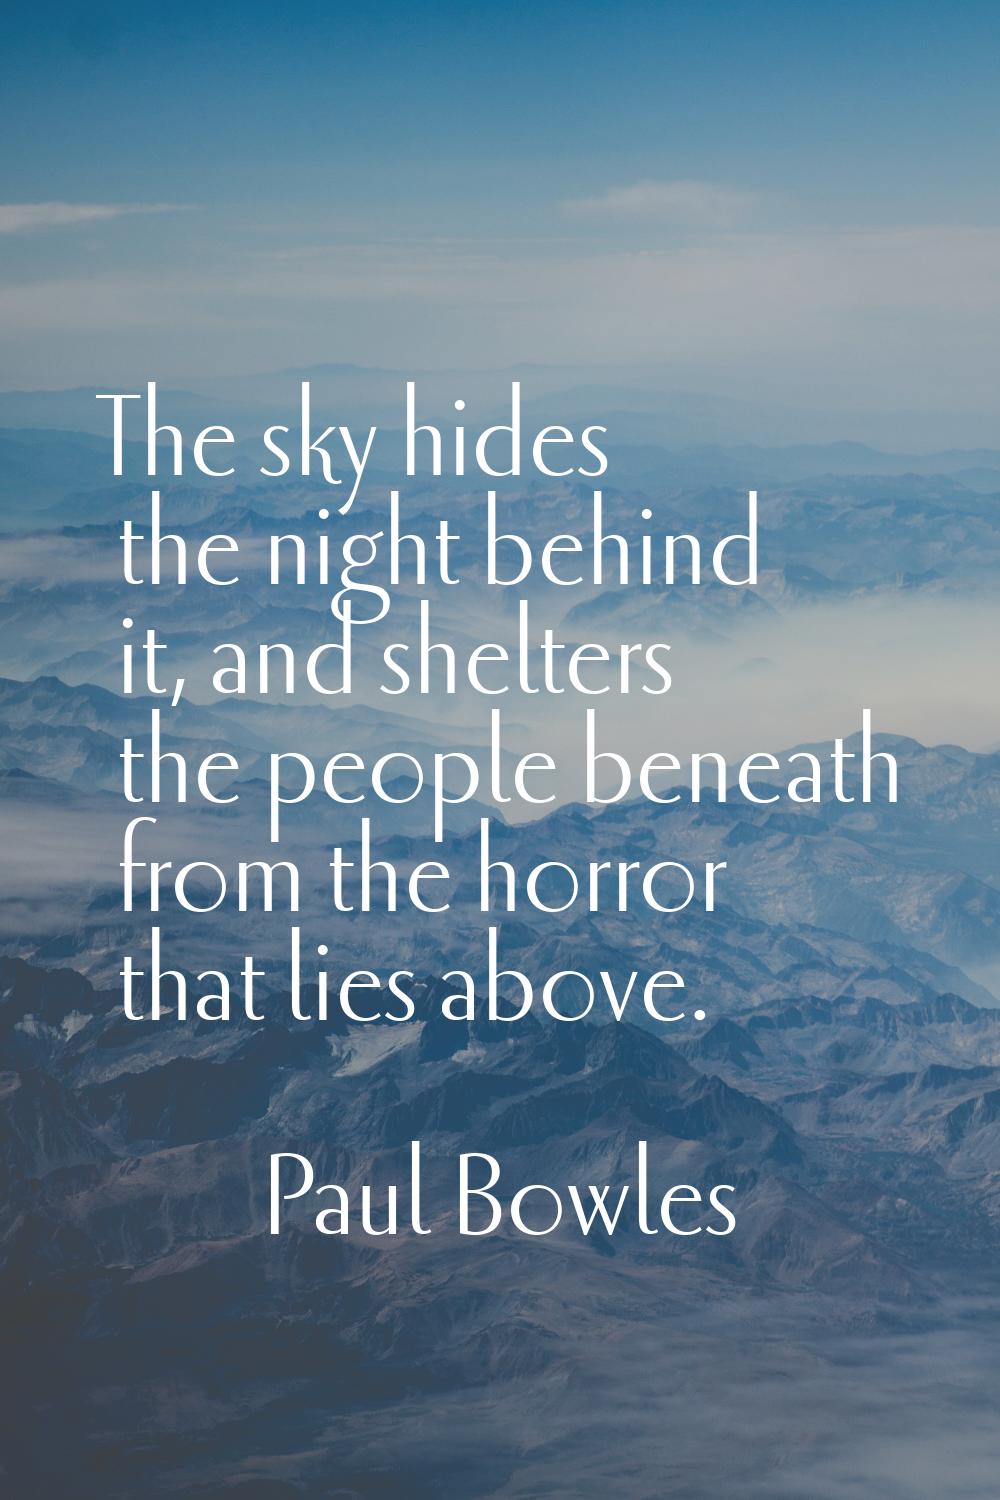 The sky hides the night behind it, and shelters the people beneath from the horror that lies above.